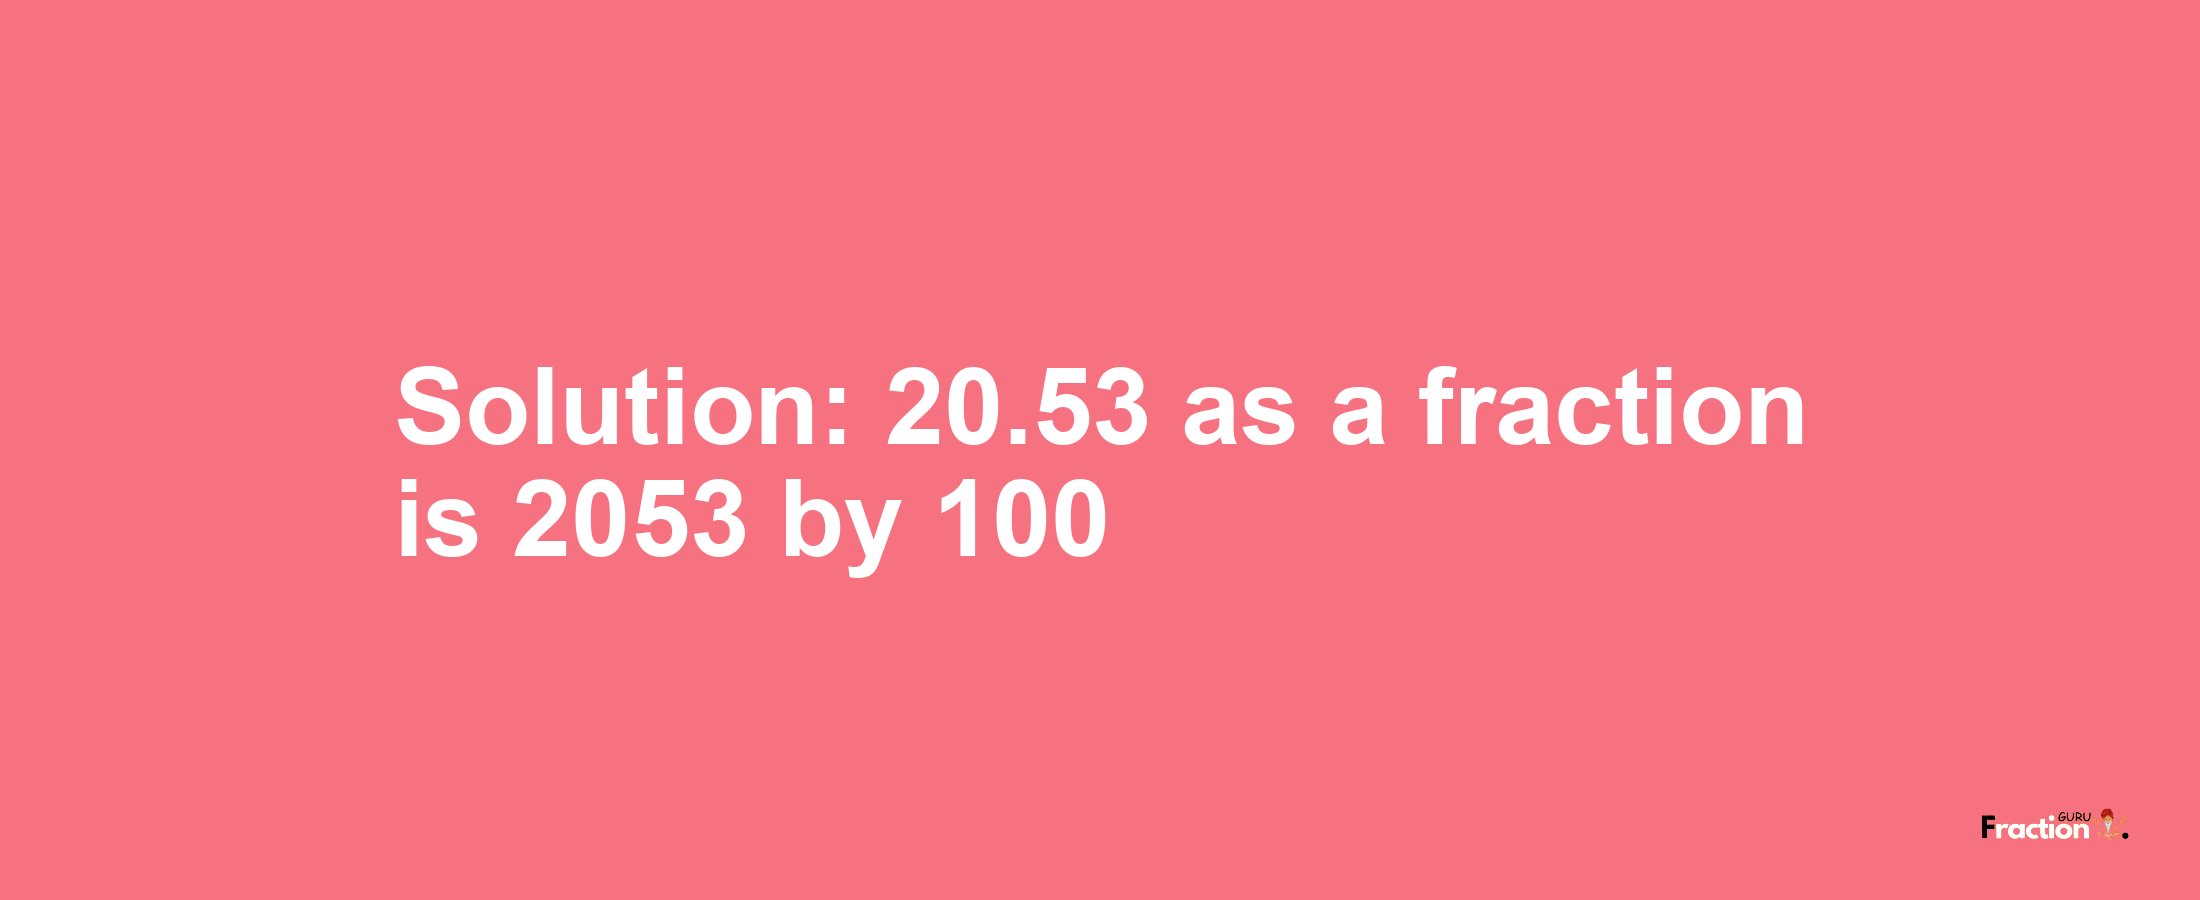 Solution:20.53 as a fraction is 2053/100